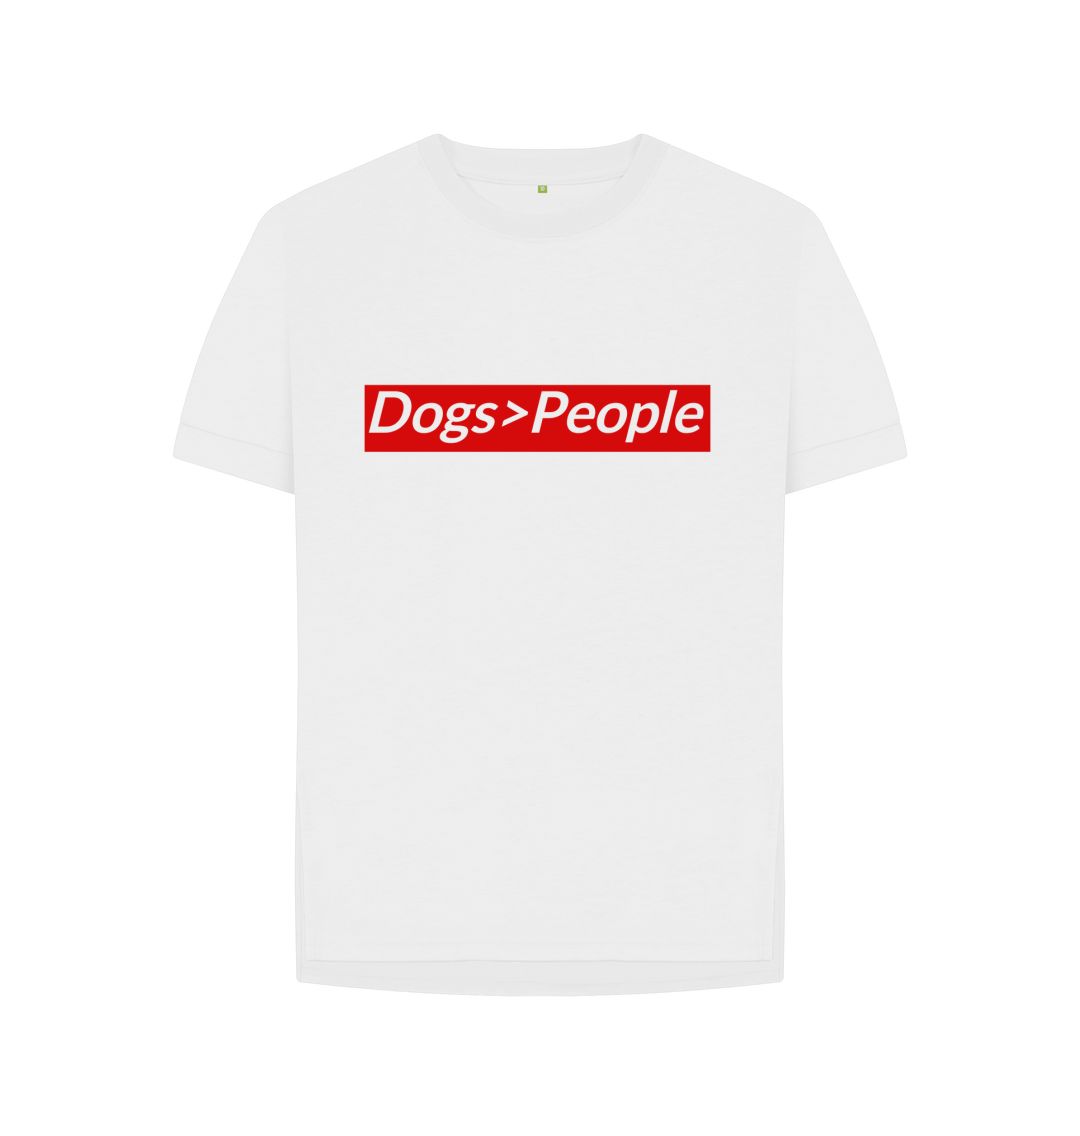 White Dogs > People Relaxed Tee